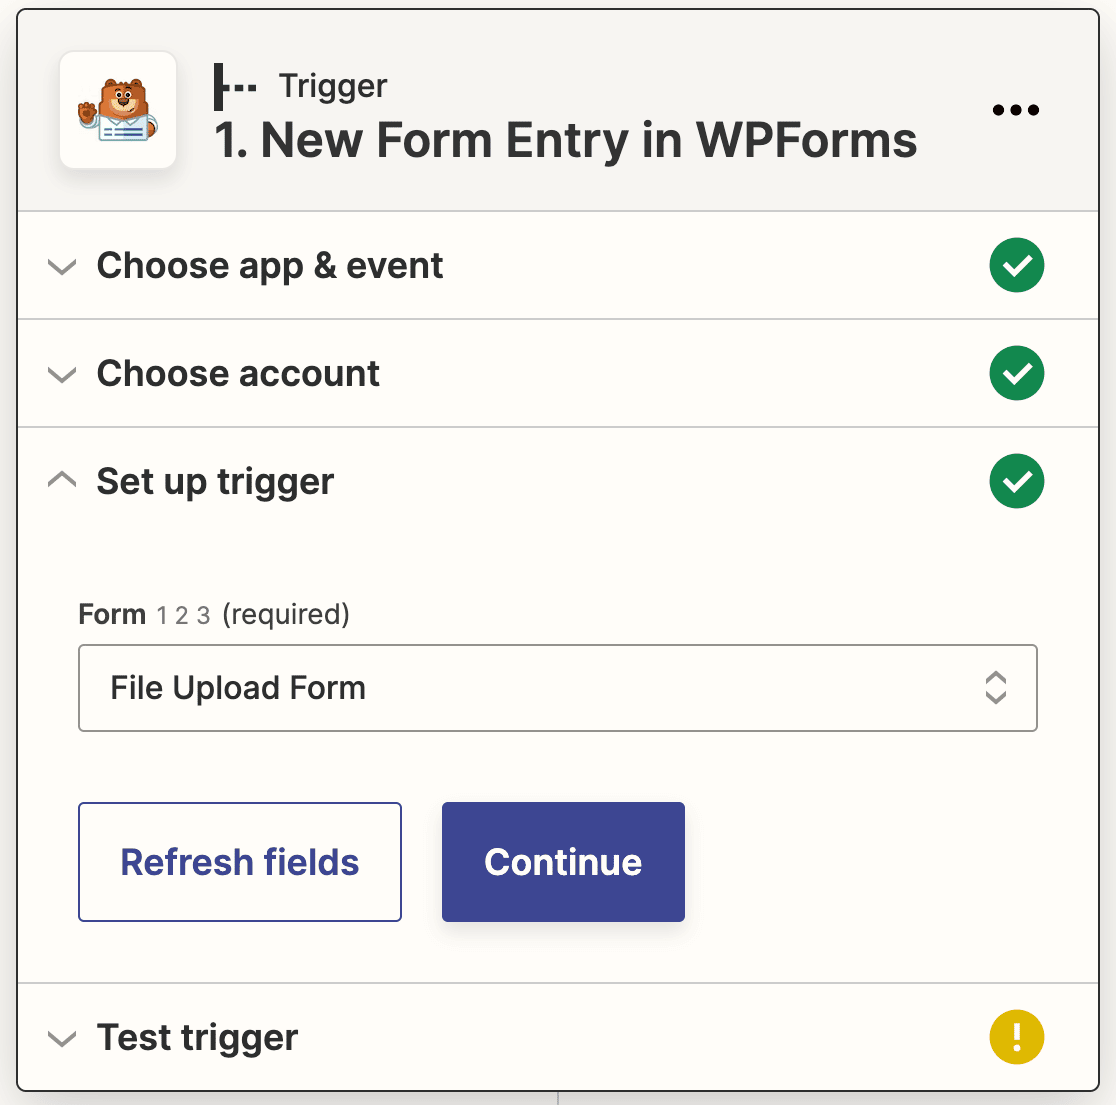 Connecting your file upload form to Zapier